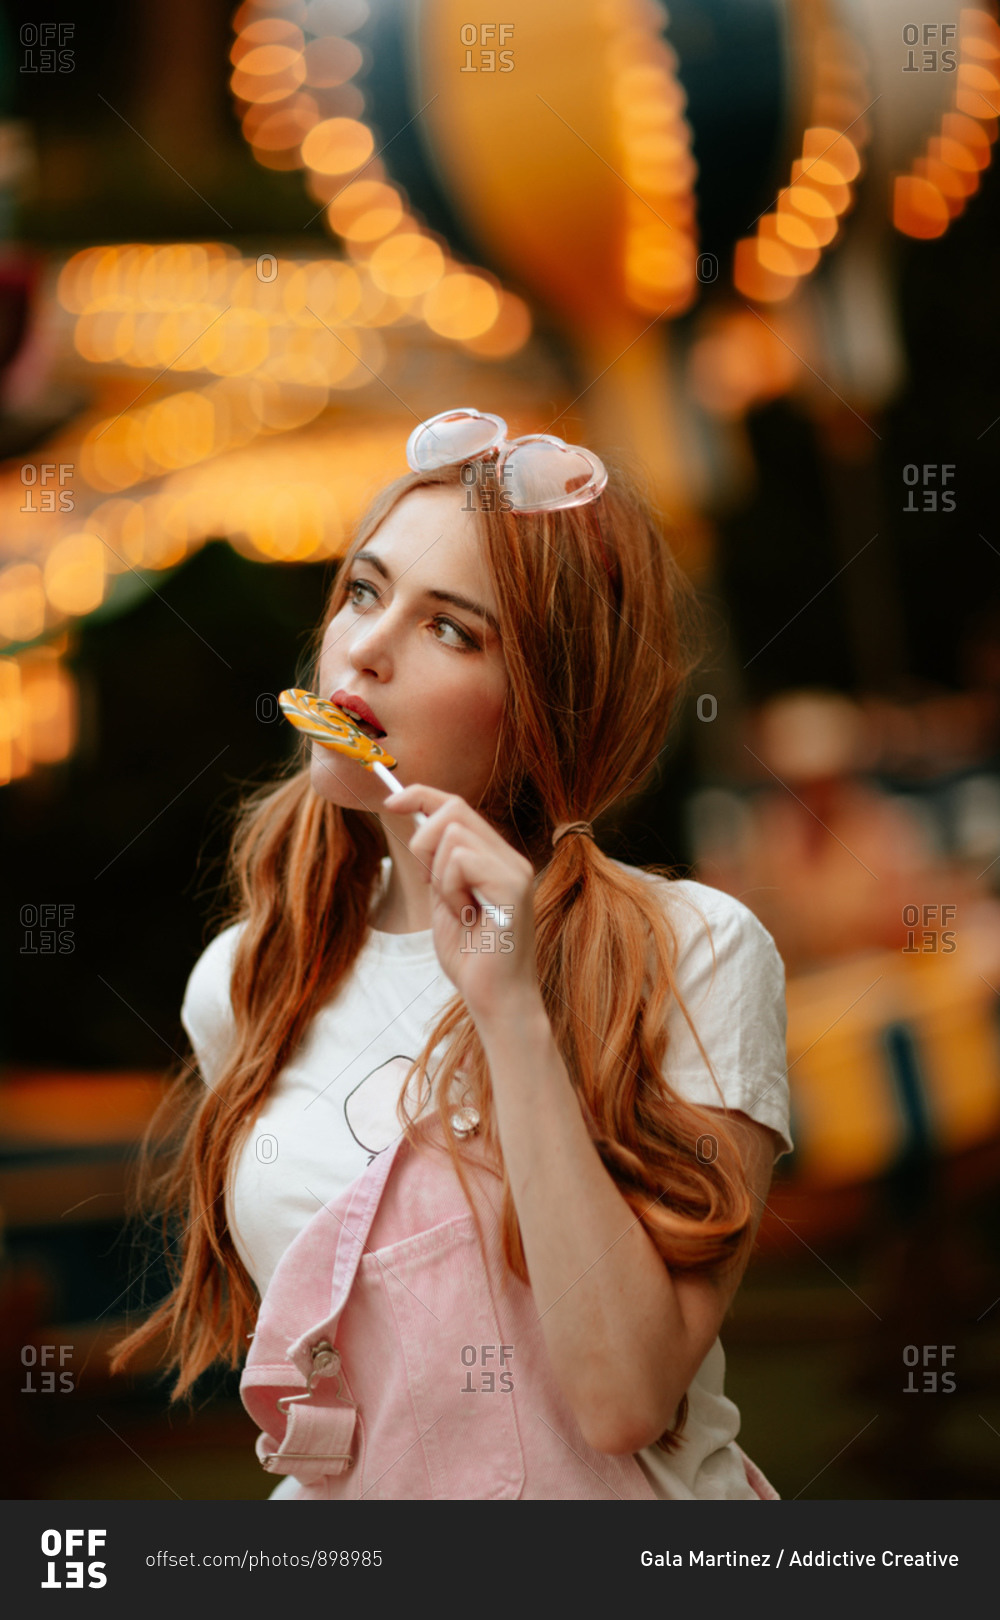 Charming red haired female teenager with ponytails and heart shaped eyeglasses on head standing in amusement park with illuminated attractions and eating lollipop